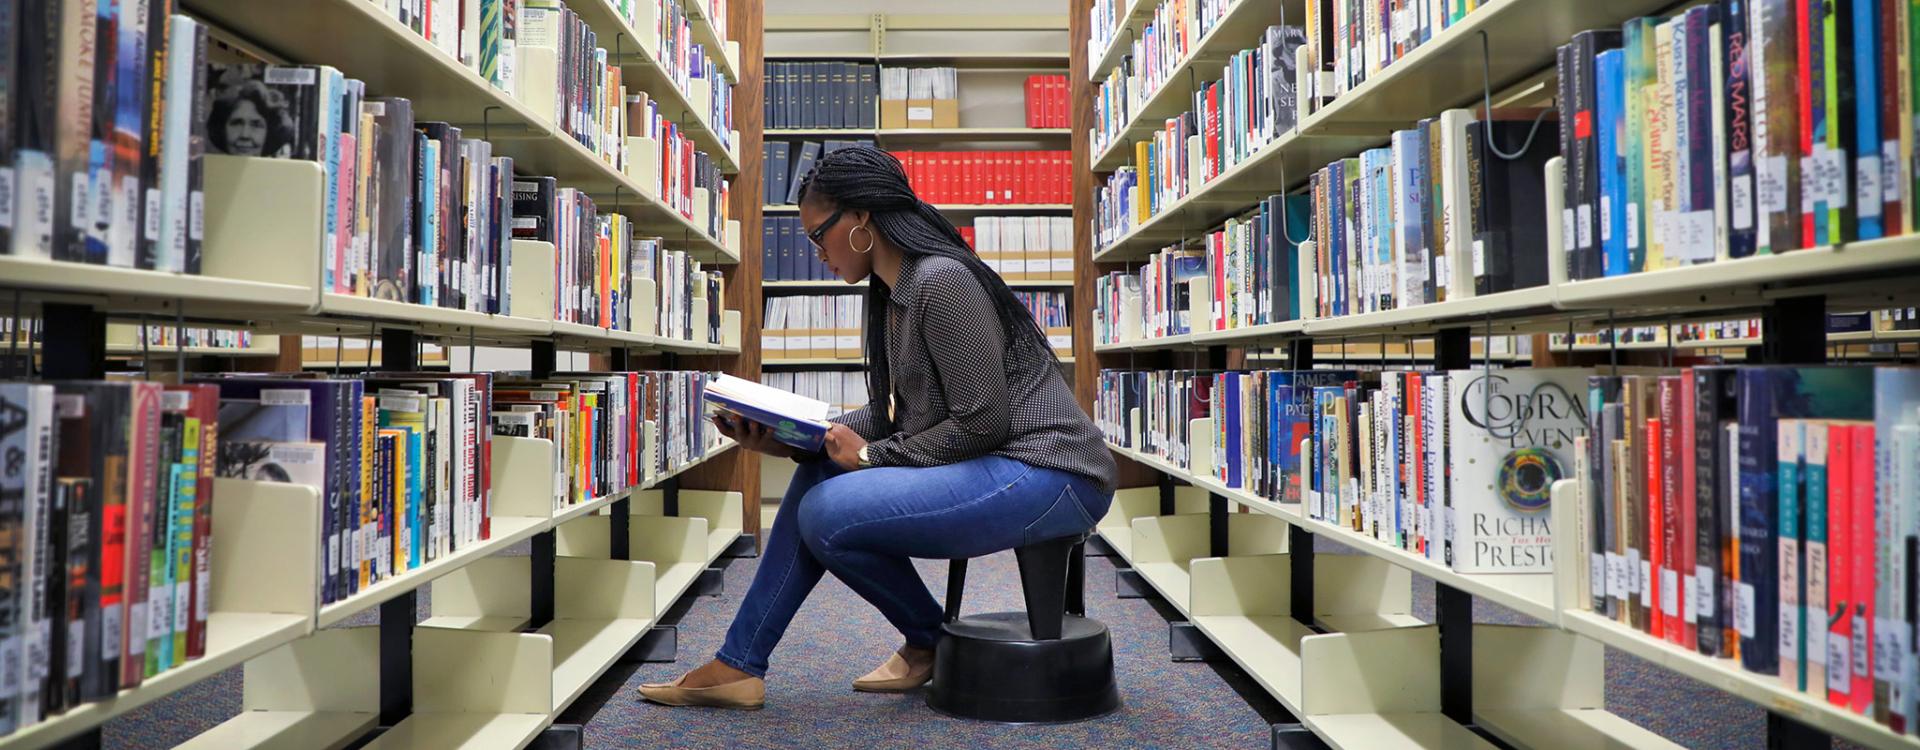 Woman sitting in rows of books reading